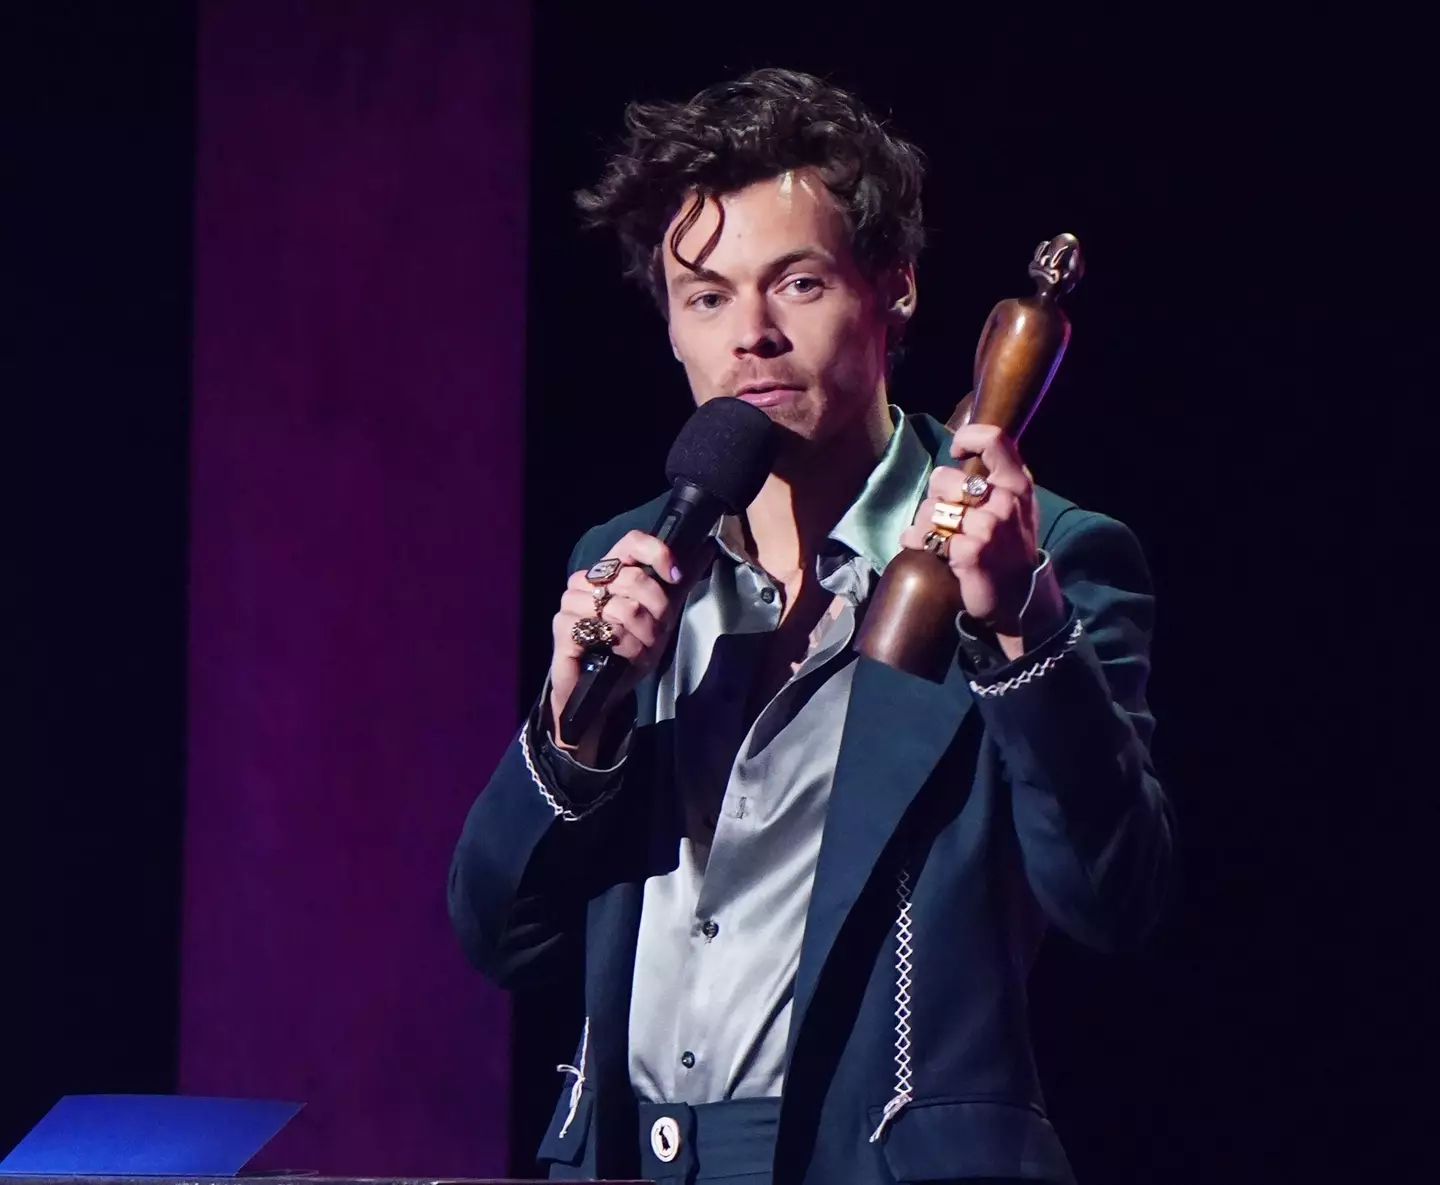 Styles picked up the Best Pop/R&B Act award.